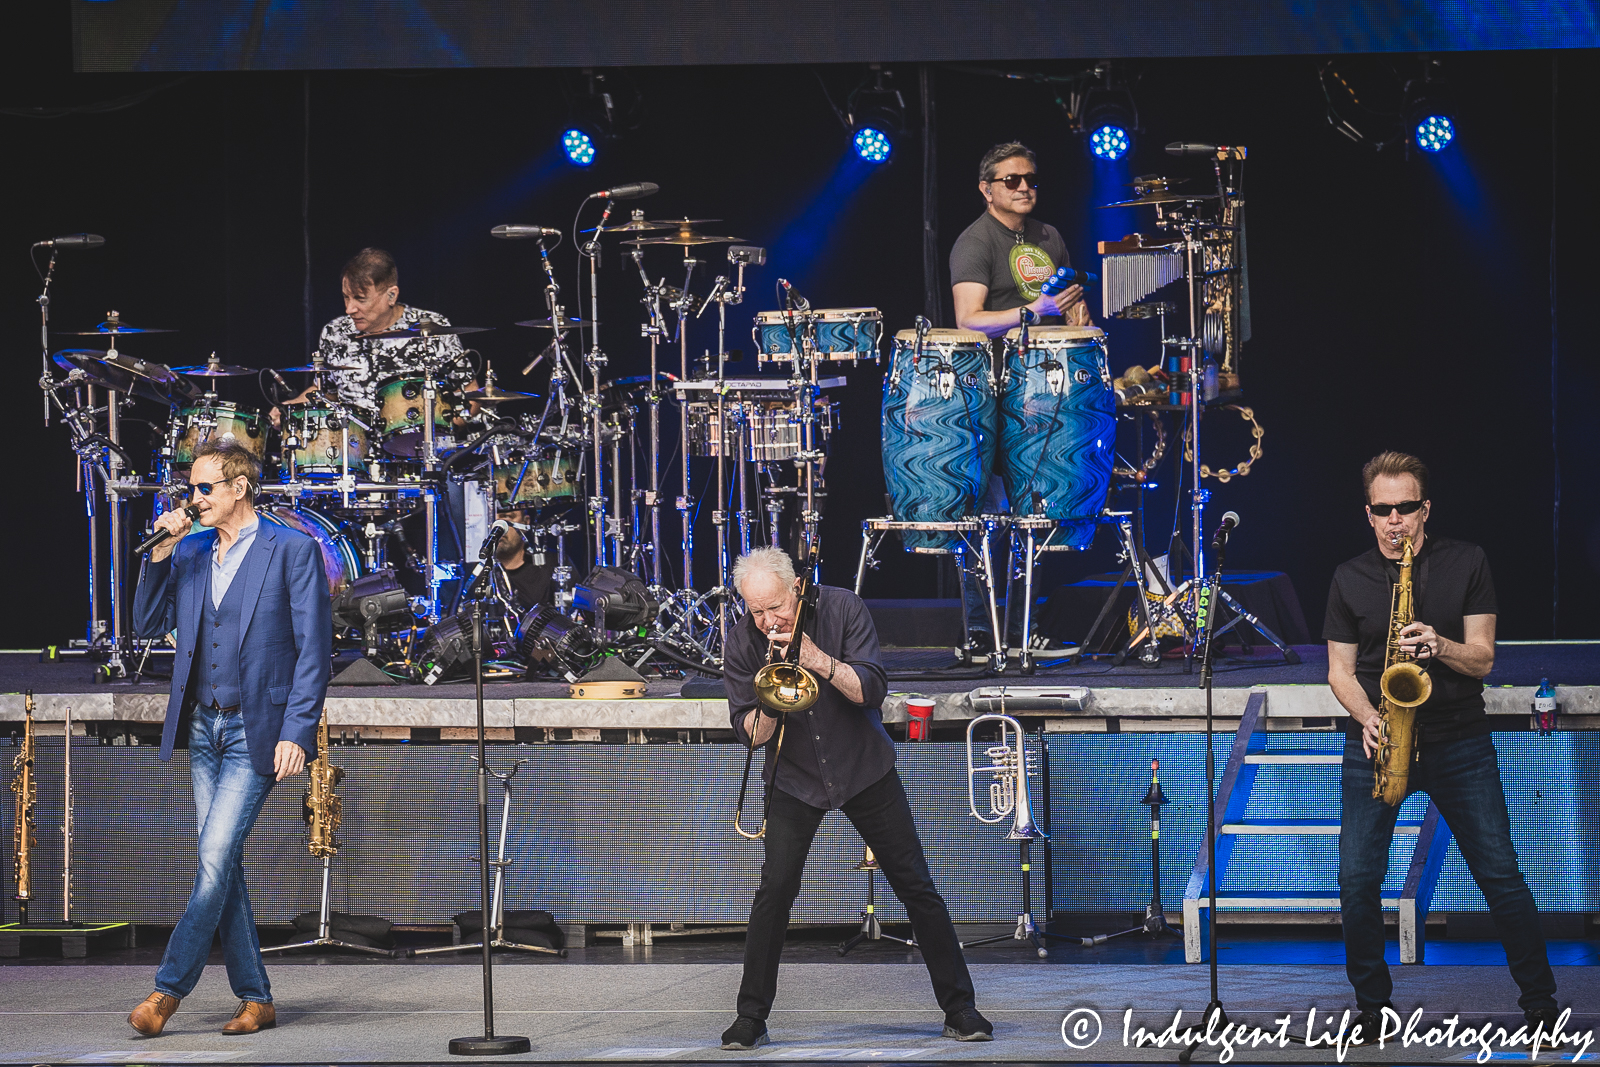 Chicago trombone player James Pankow performing live in concert at Starlight Theatre in Kansas City, MO on May 26, 203.